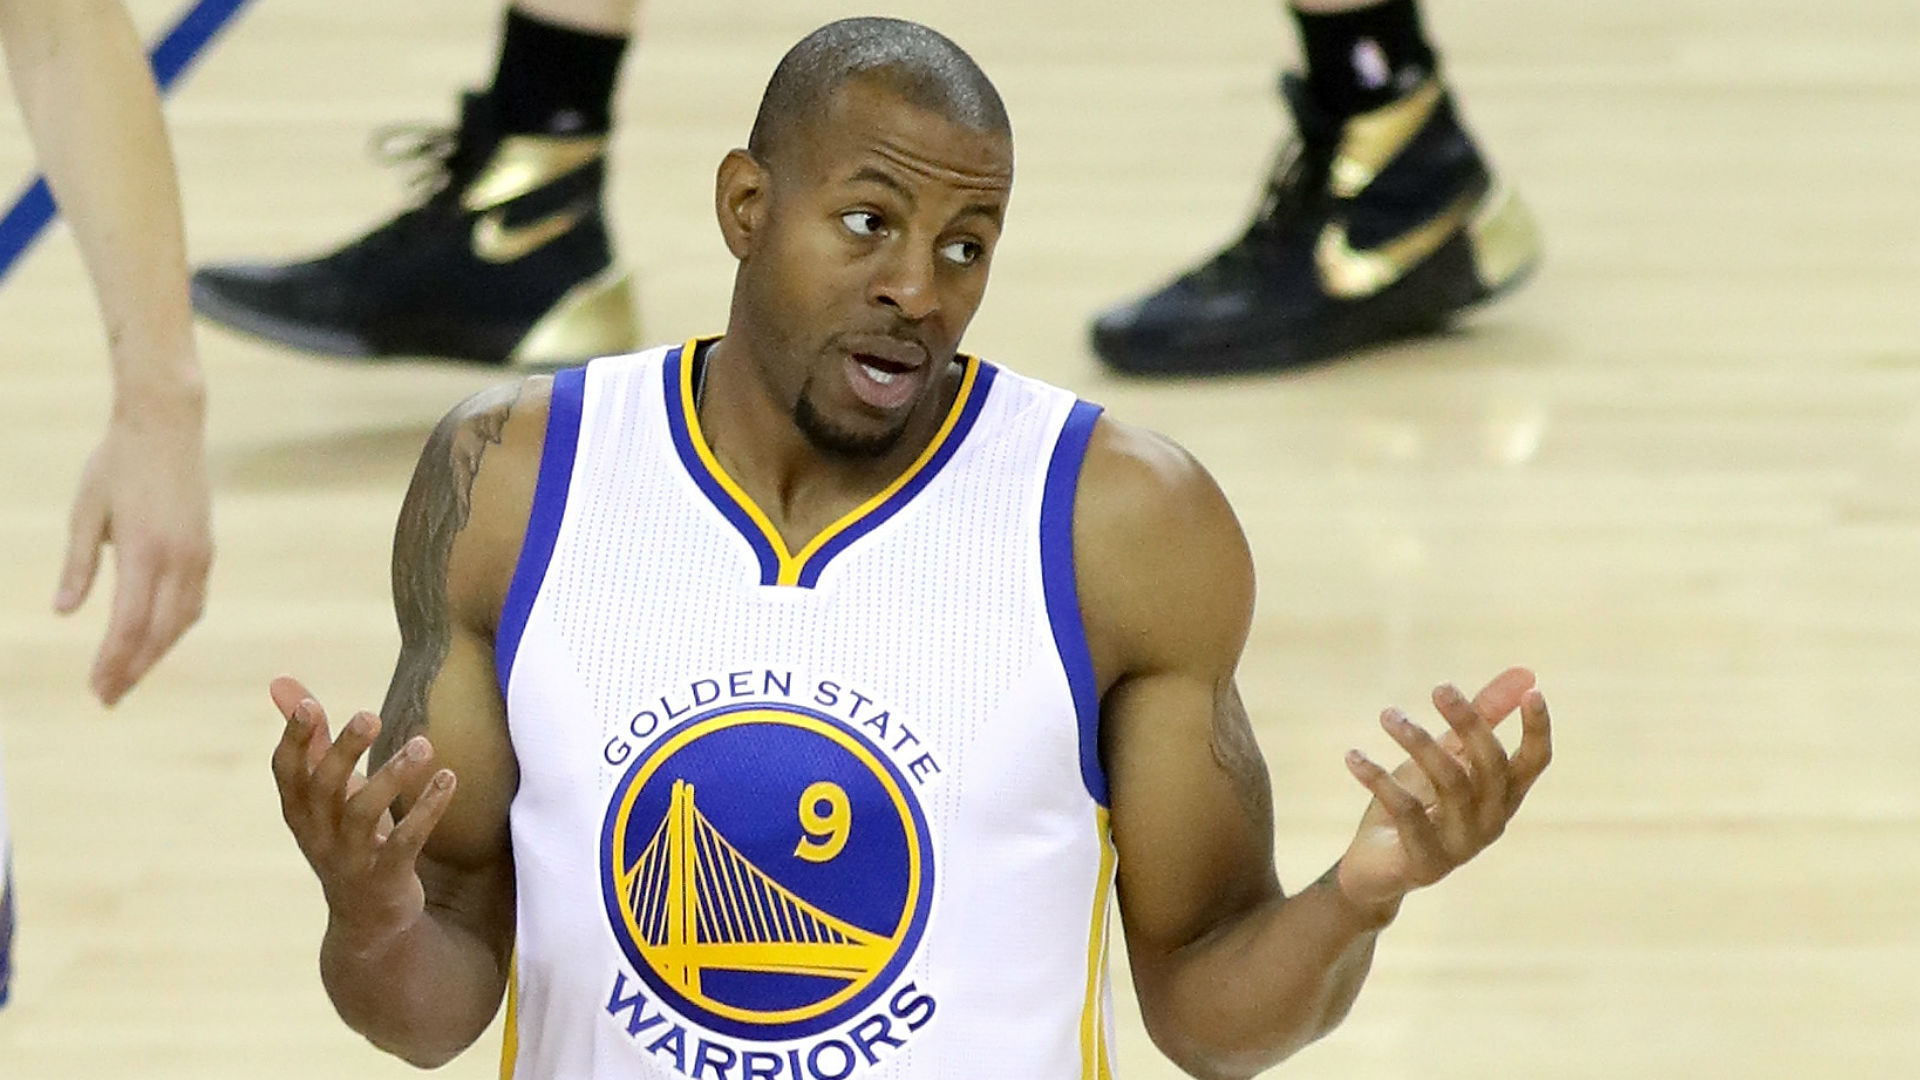 Andre Iguodala will serve as NBPA first vice-president, replacing LeBron James.